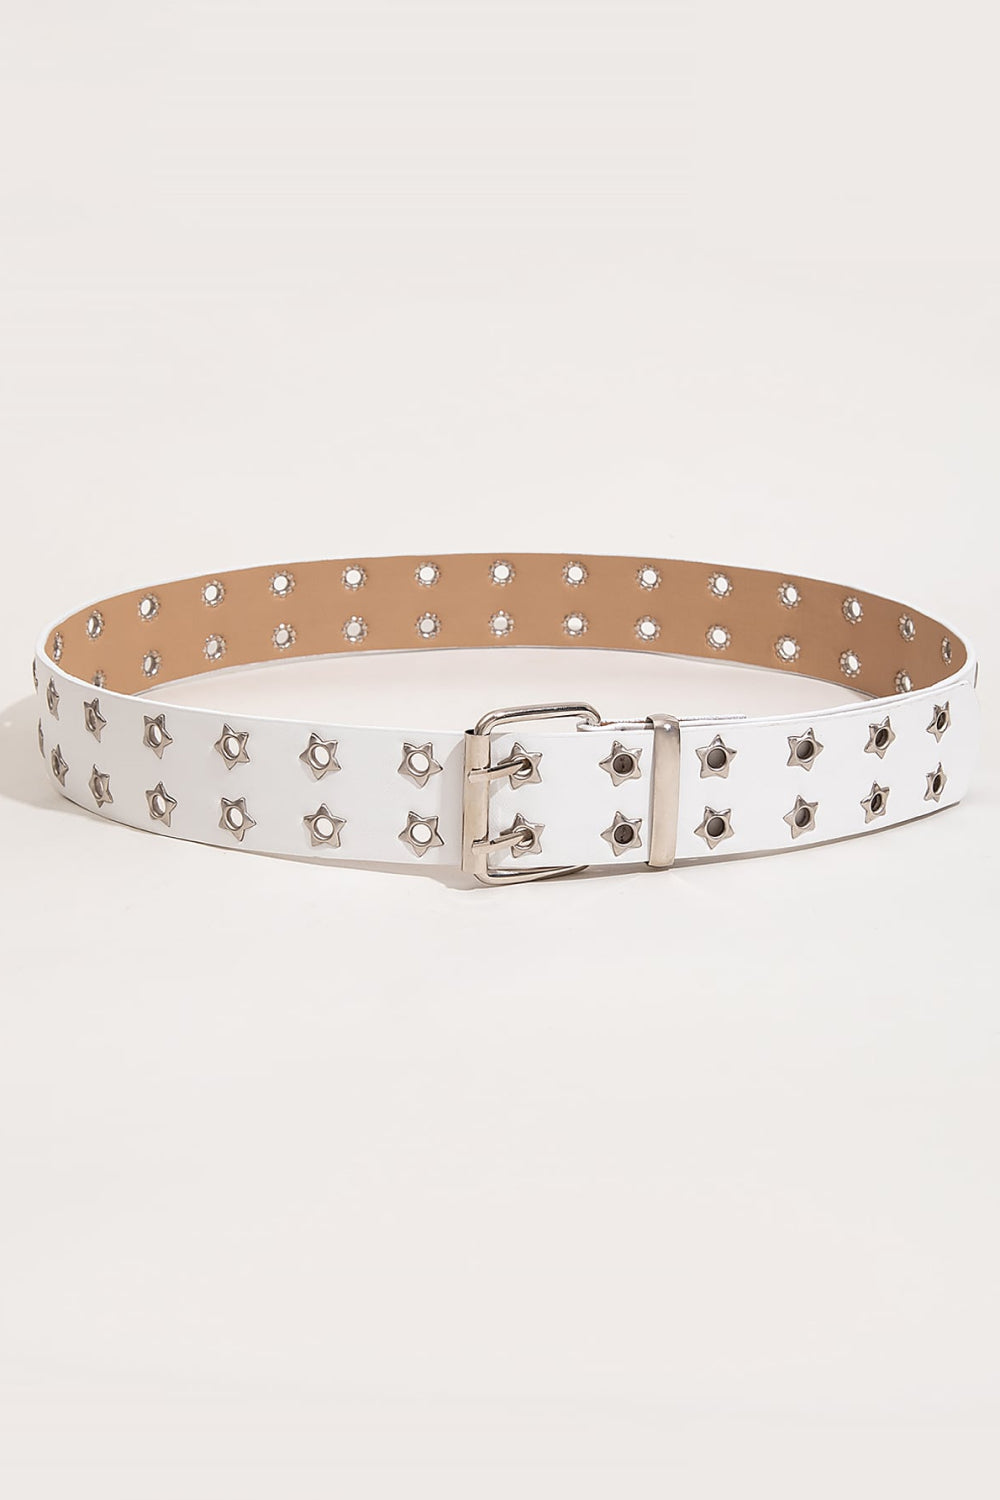 While Double Row Star Grommet PU Leather Belt